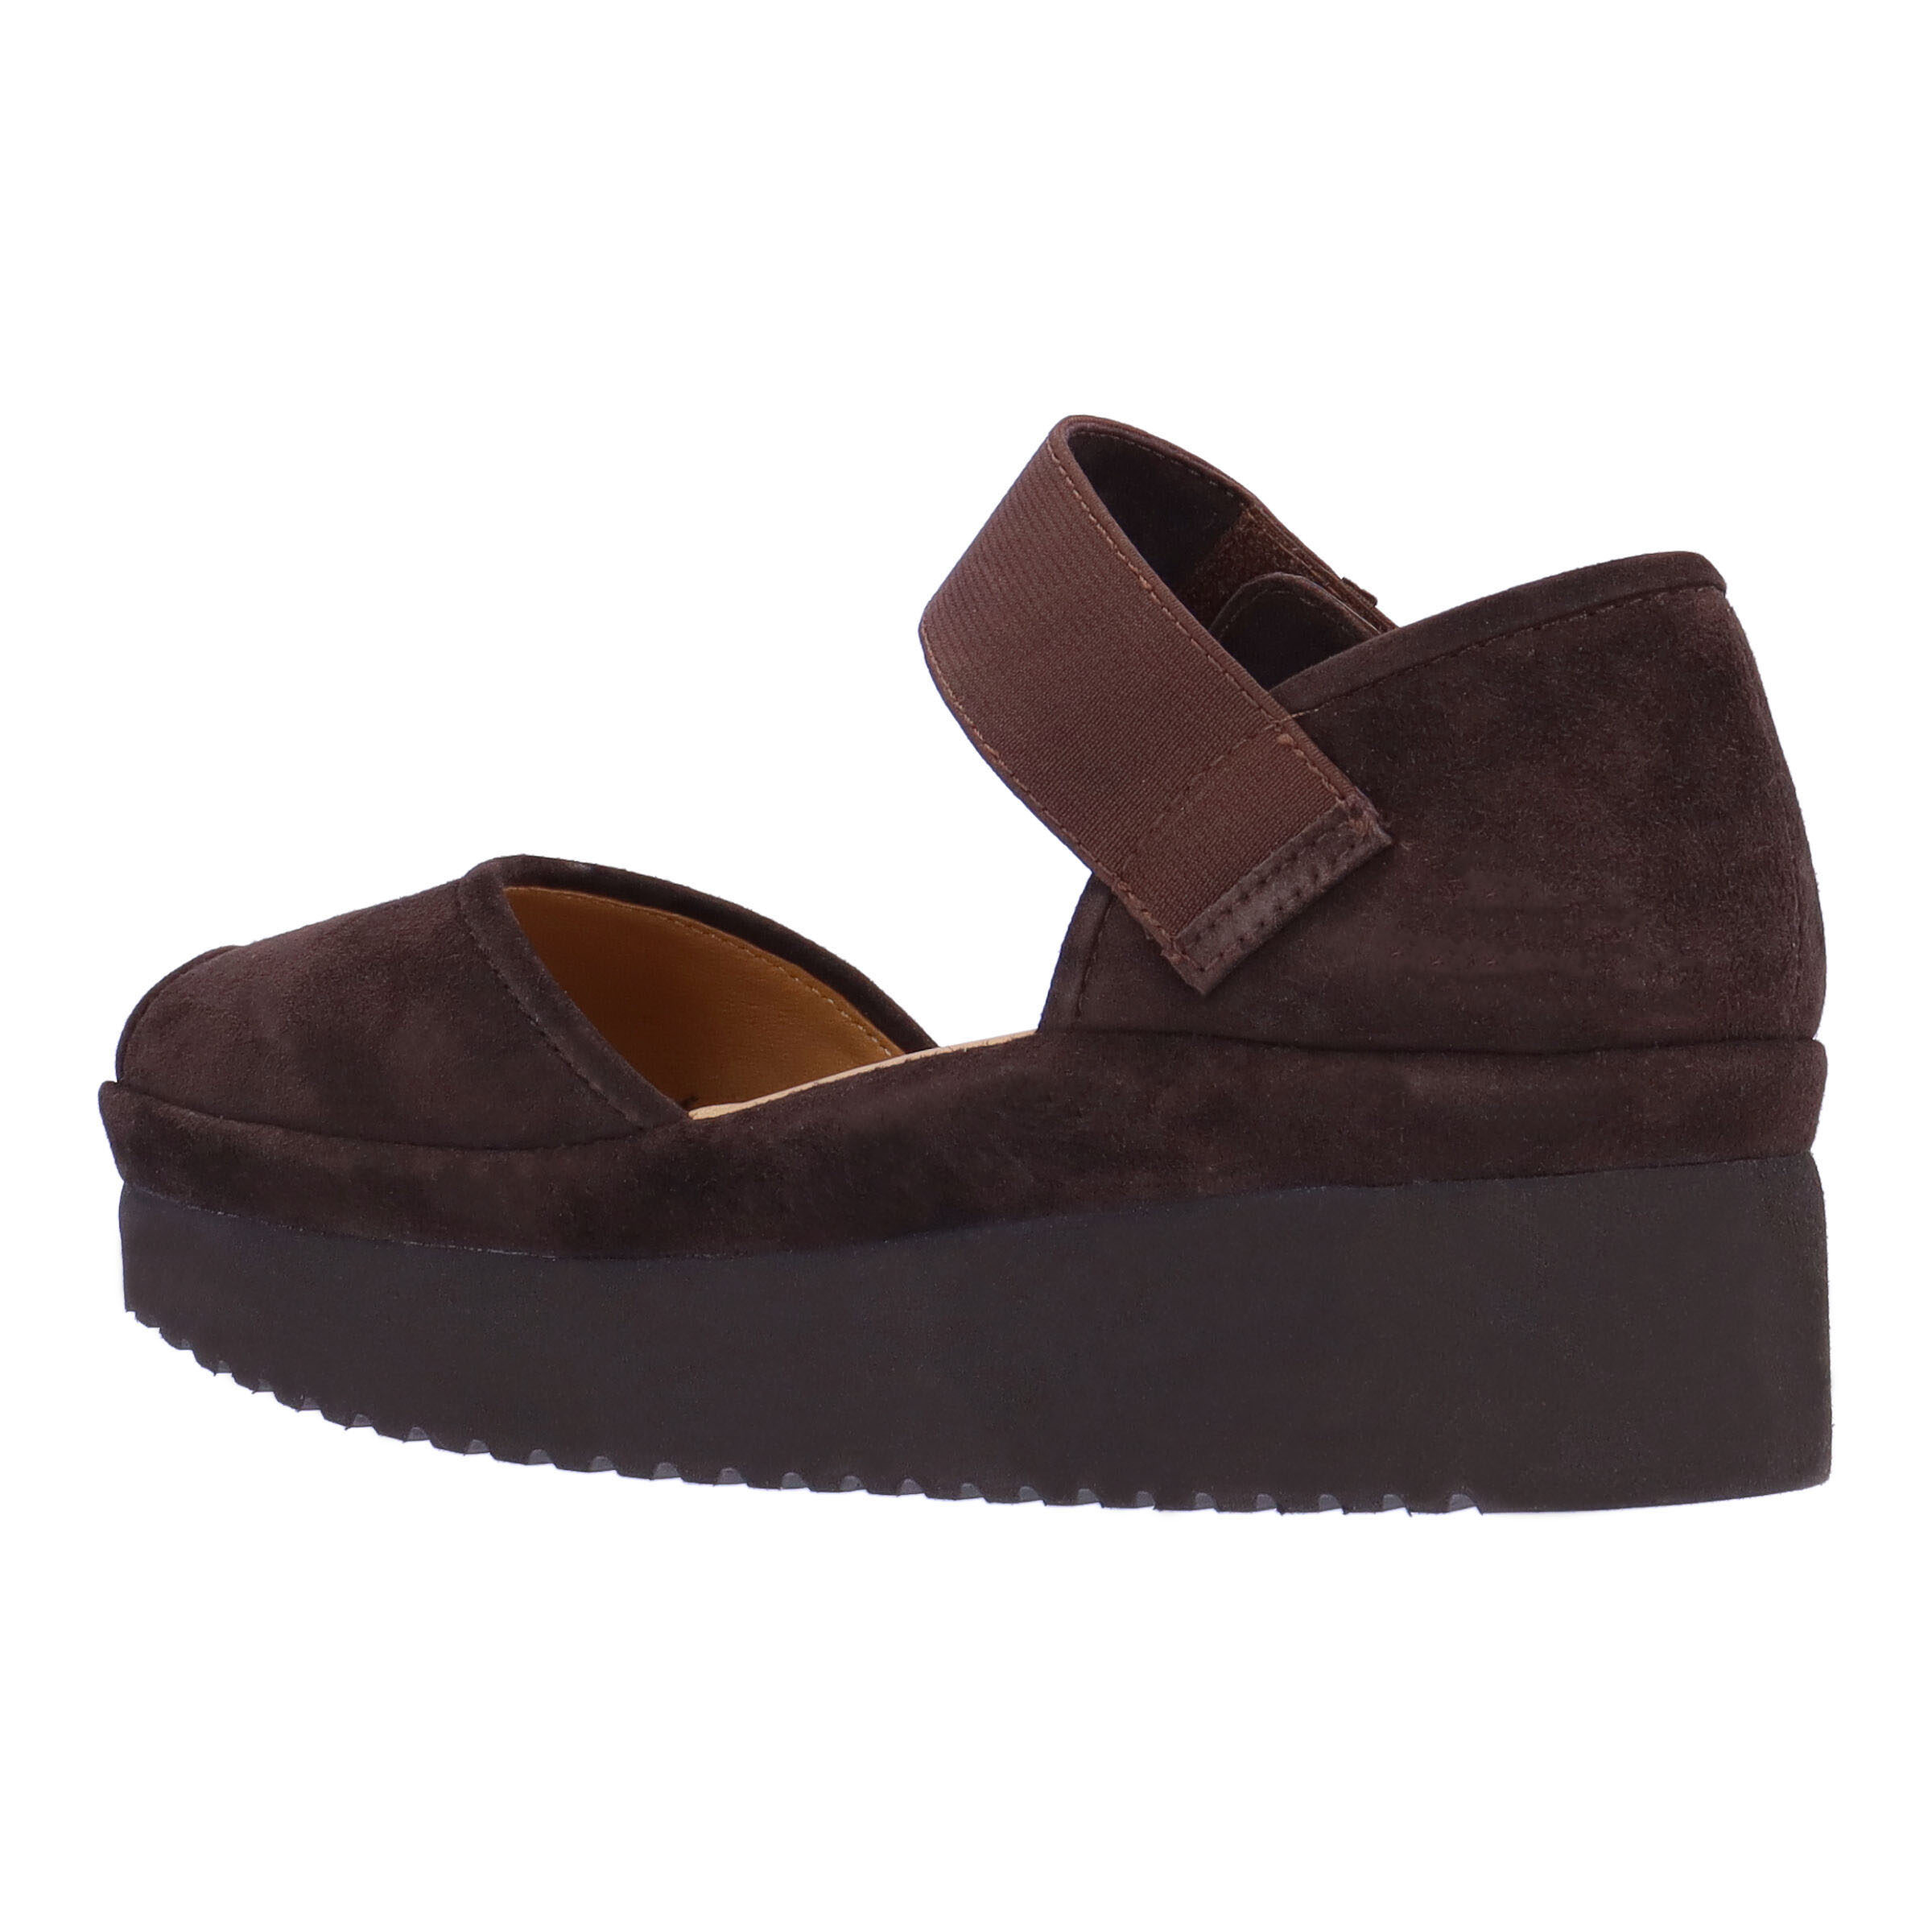 AMADOUR SUEDE WEDGE